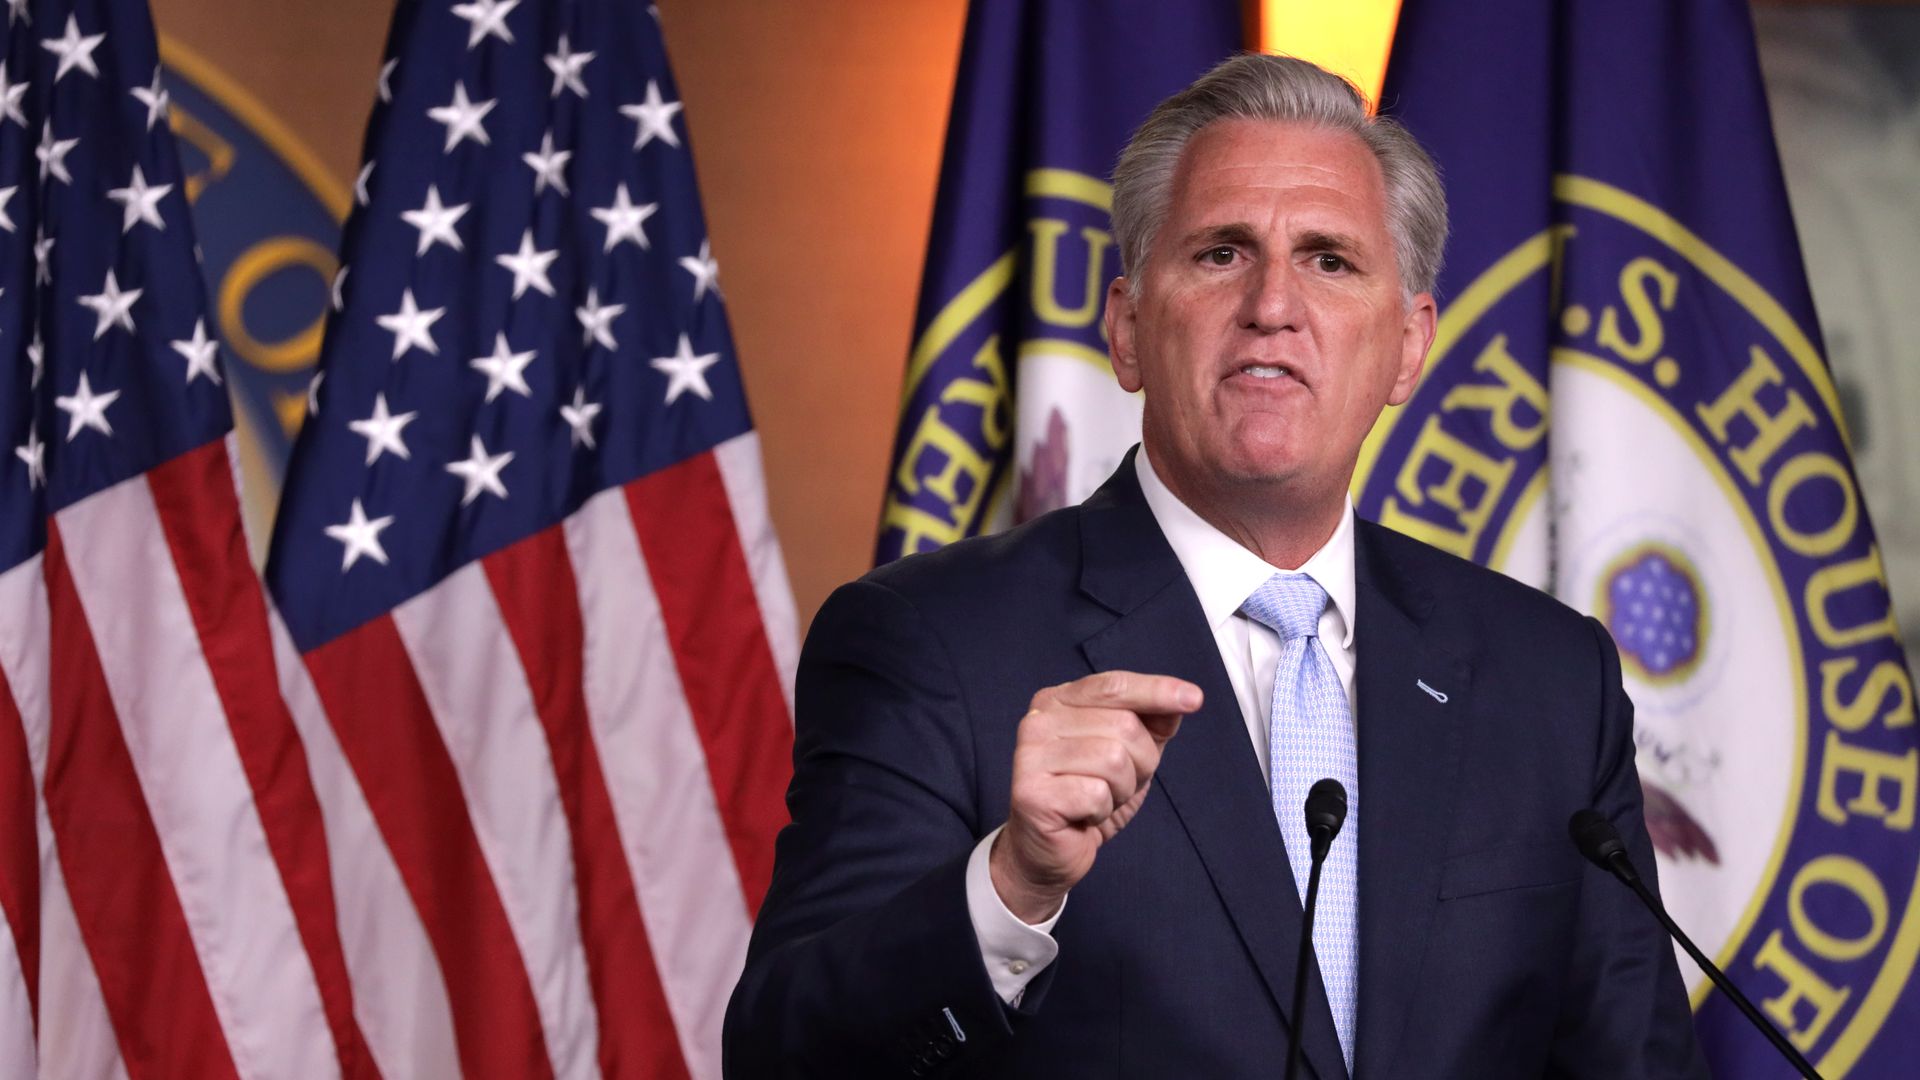 House GOP Leader Kevin McCarthy points a finger and speaks emphatically